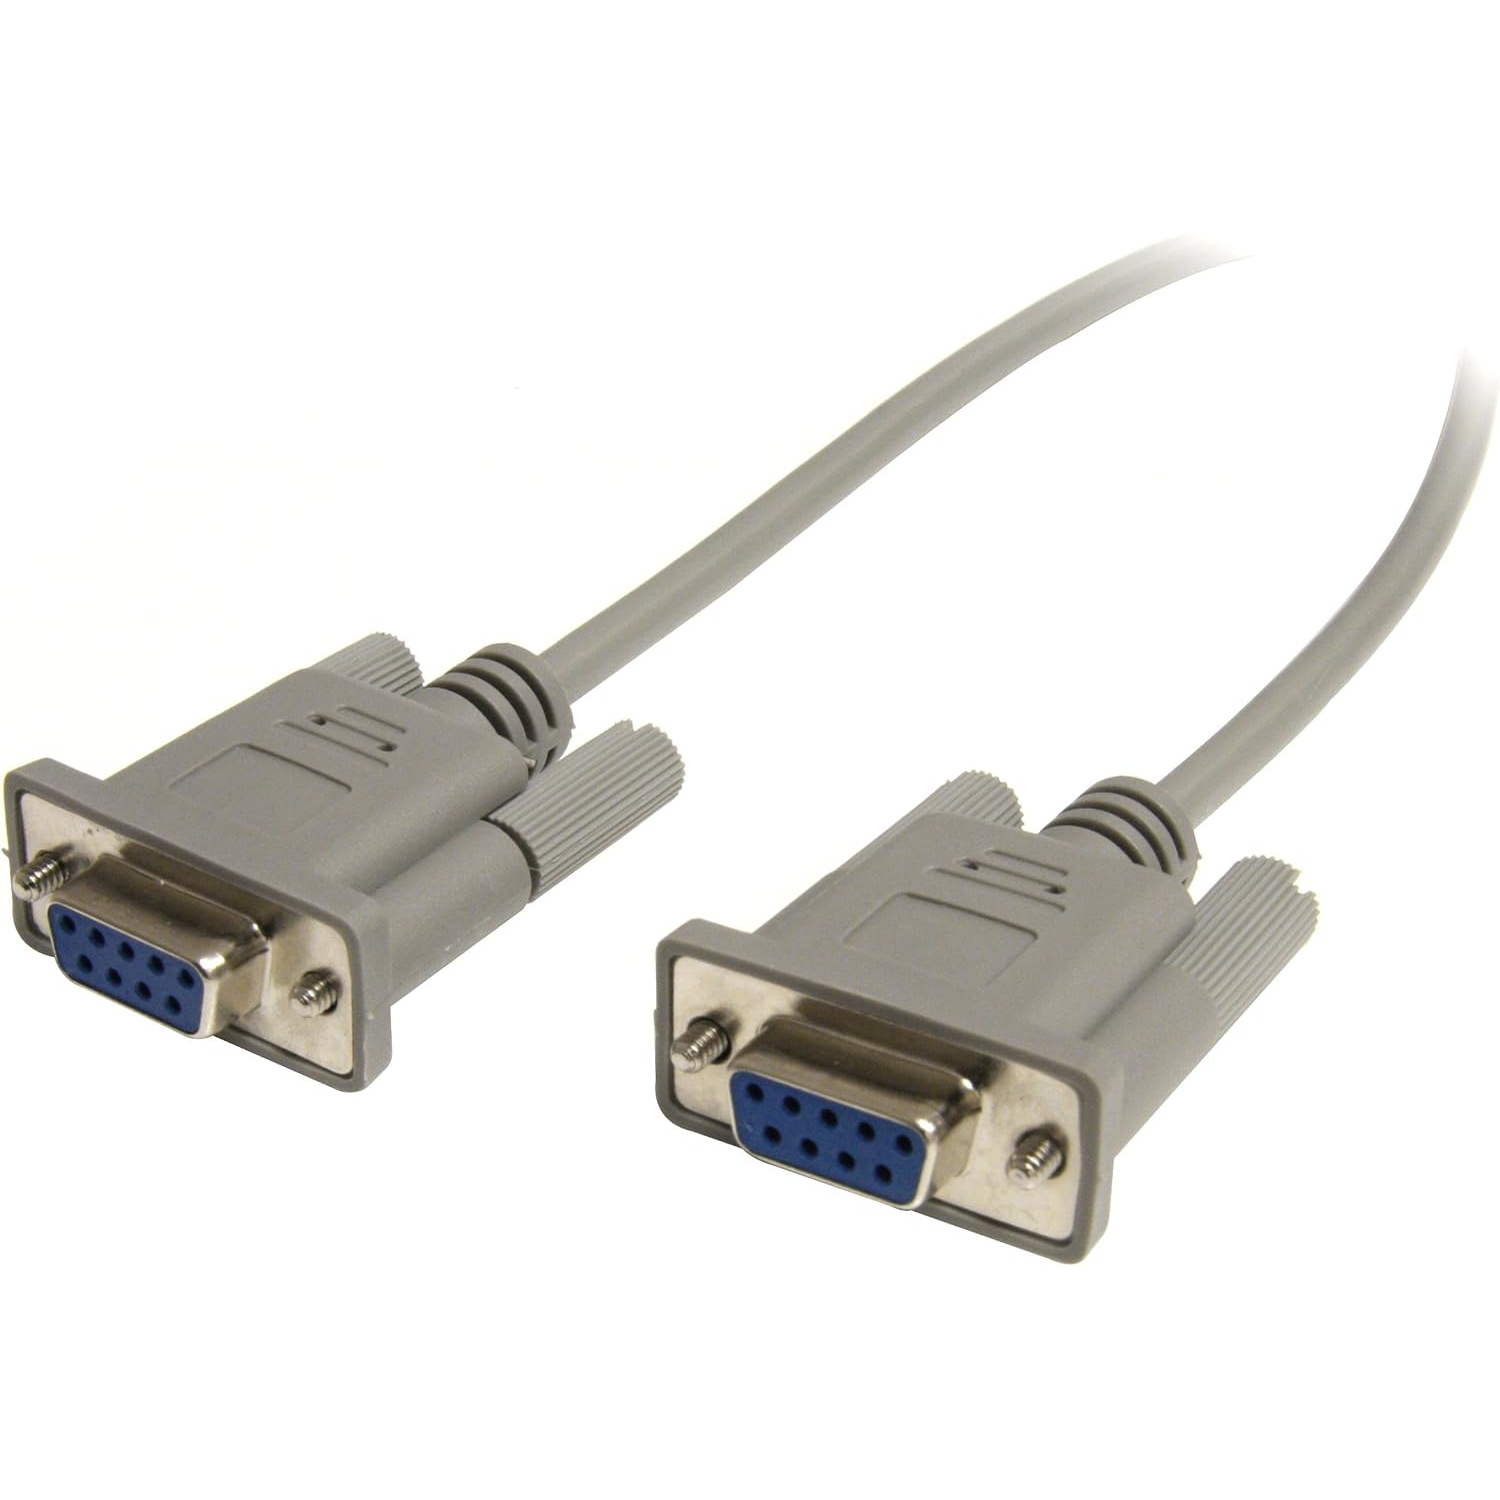 StarTech SCNM9FF25 Cross Wired DB9 Serial Null Modem Cable, F/F, 25-Feet